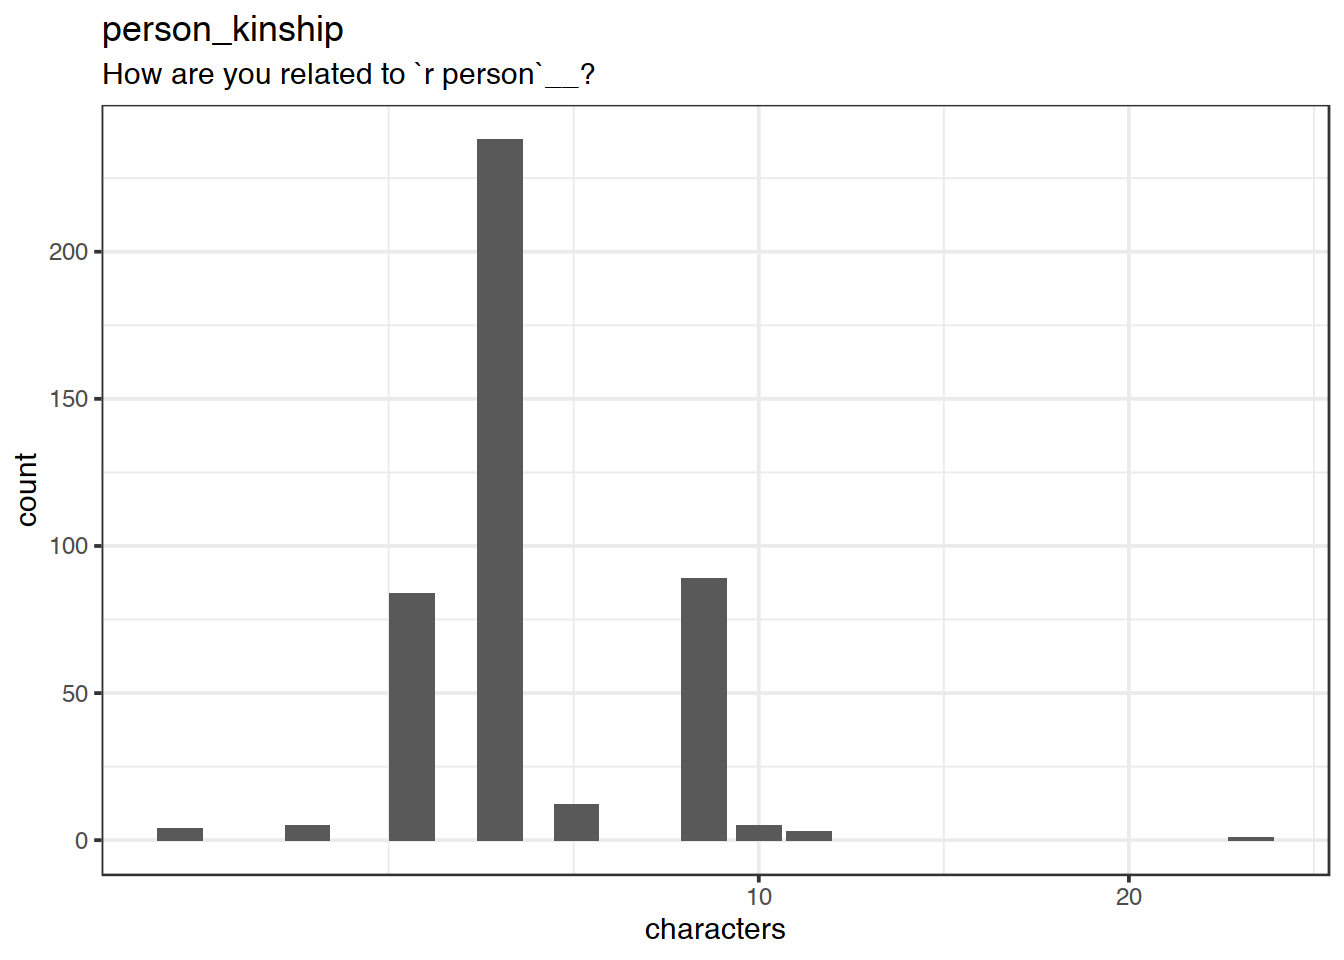 Distribution of values for person_kinship